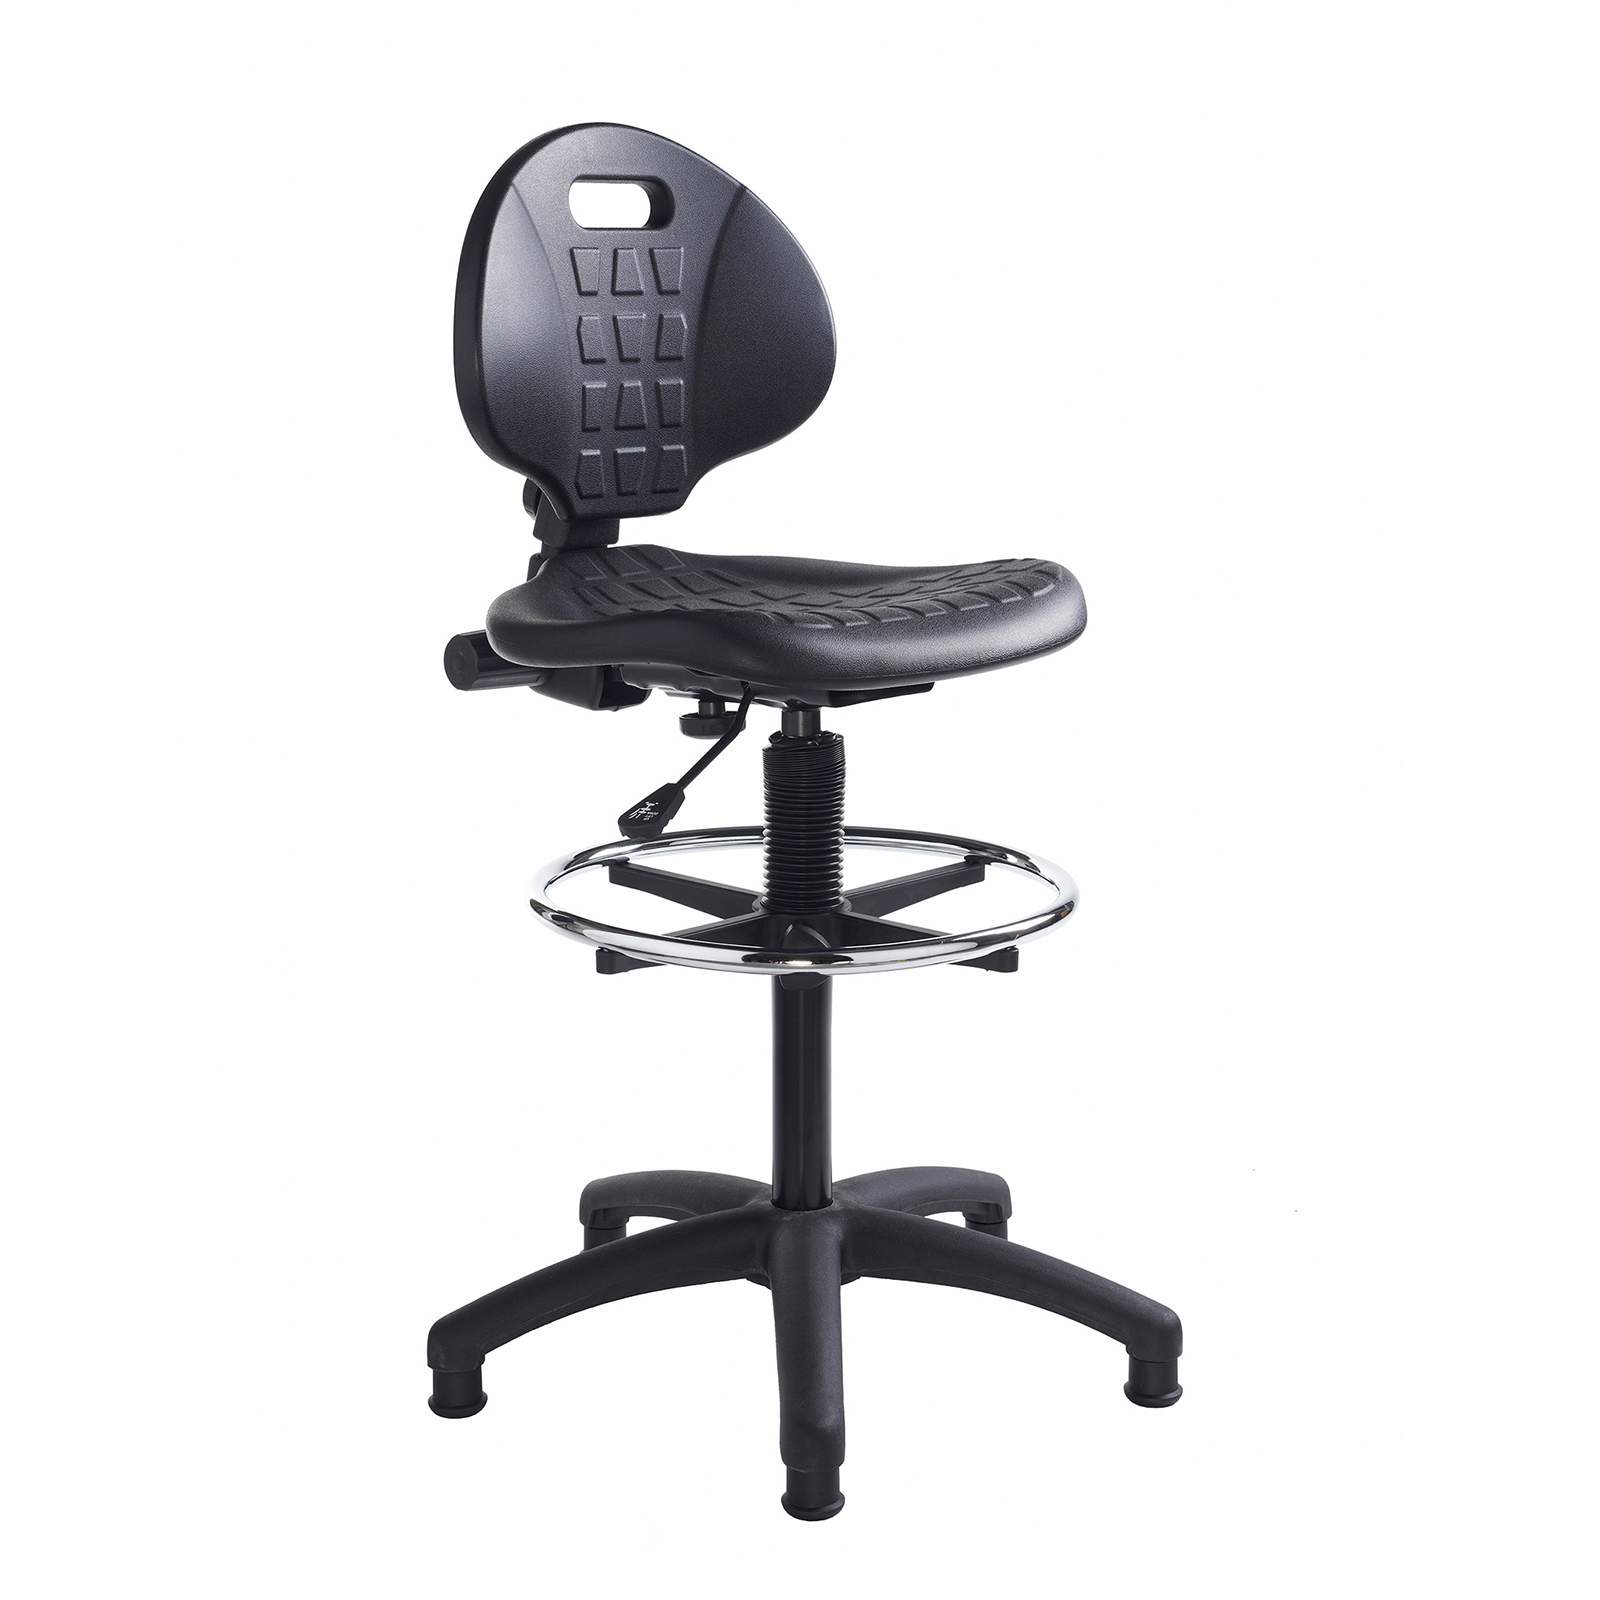 Prema polyurethane industrial operator chair with contoured back support - black